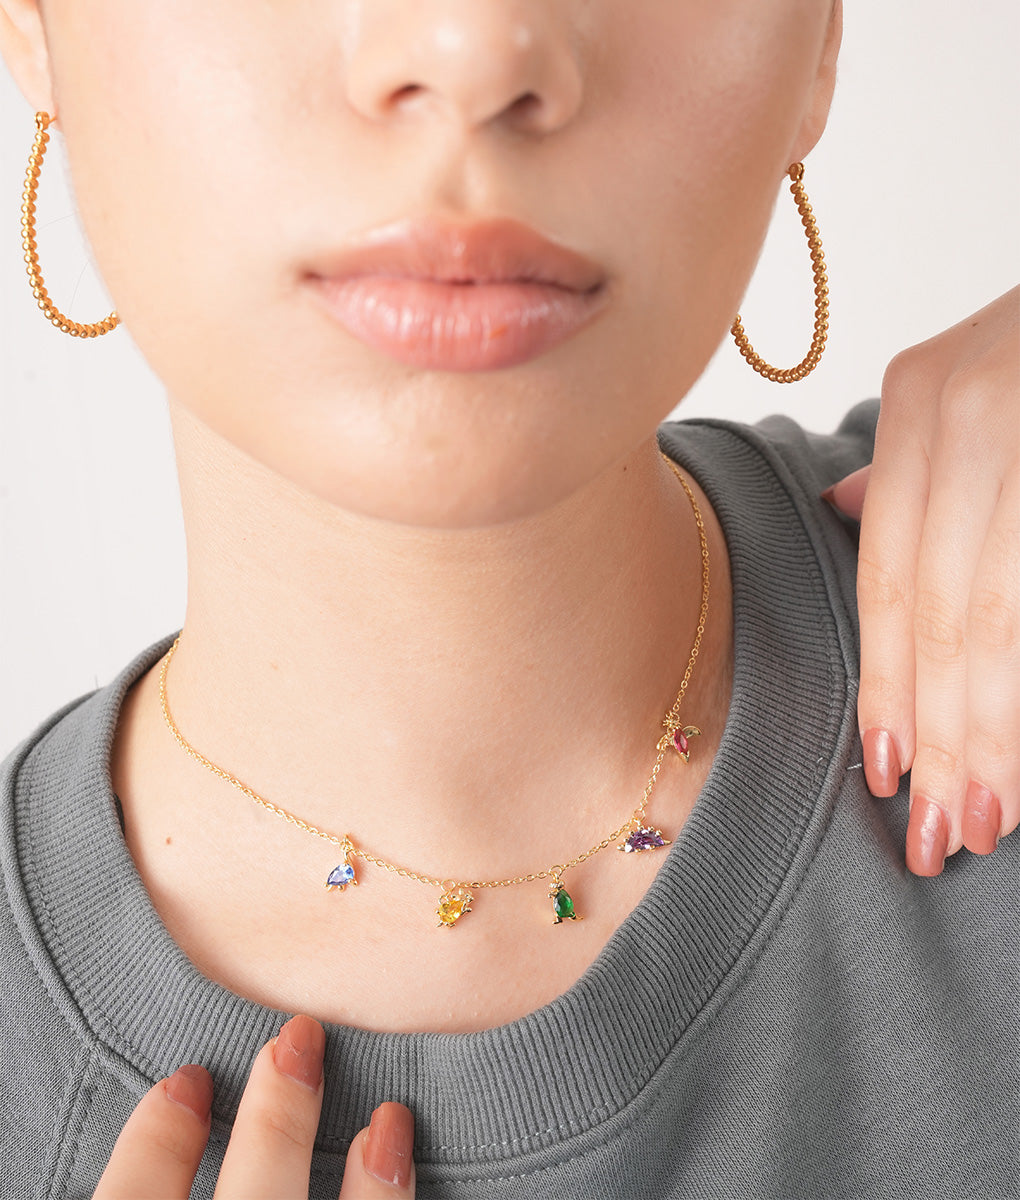 gold-plated chain and delightful dangling charms.